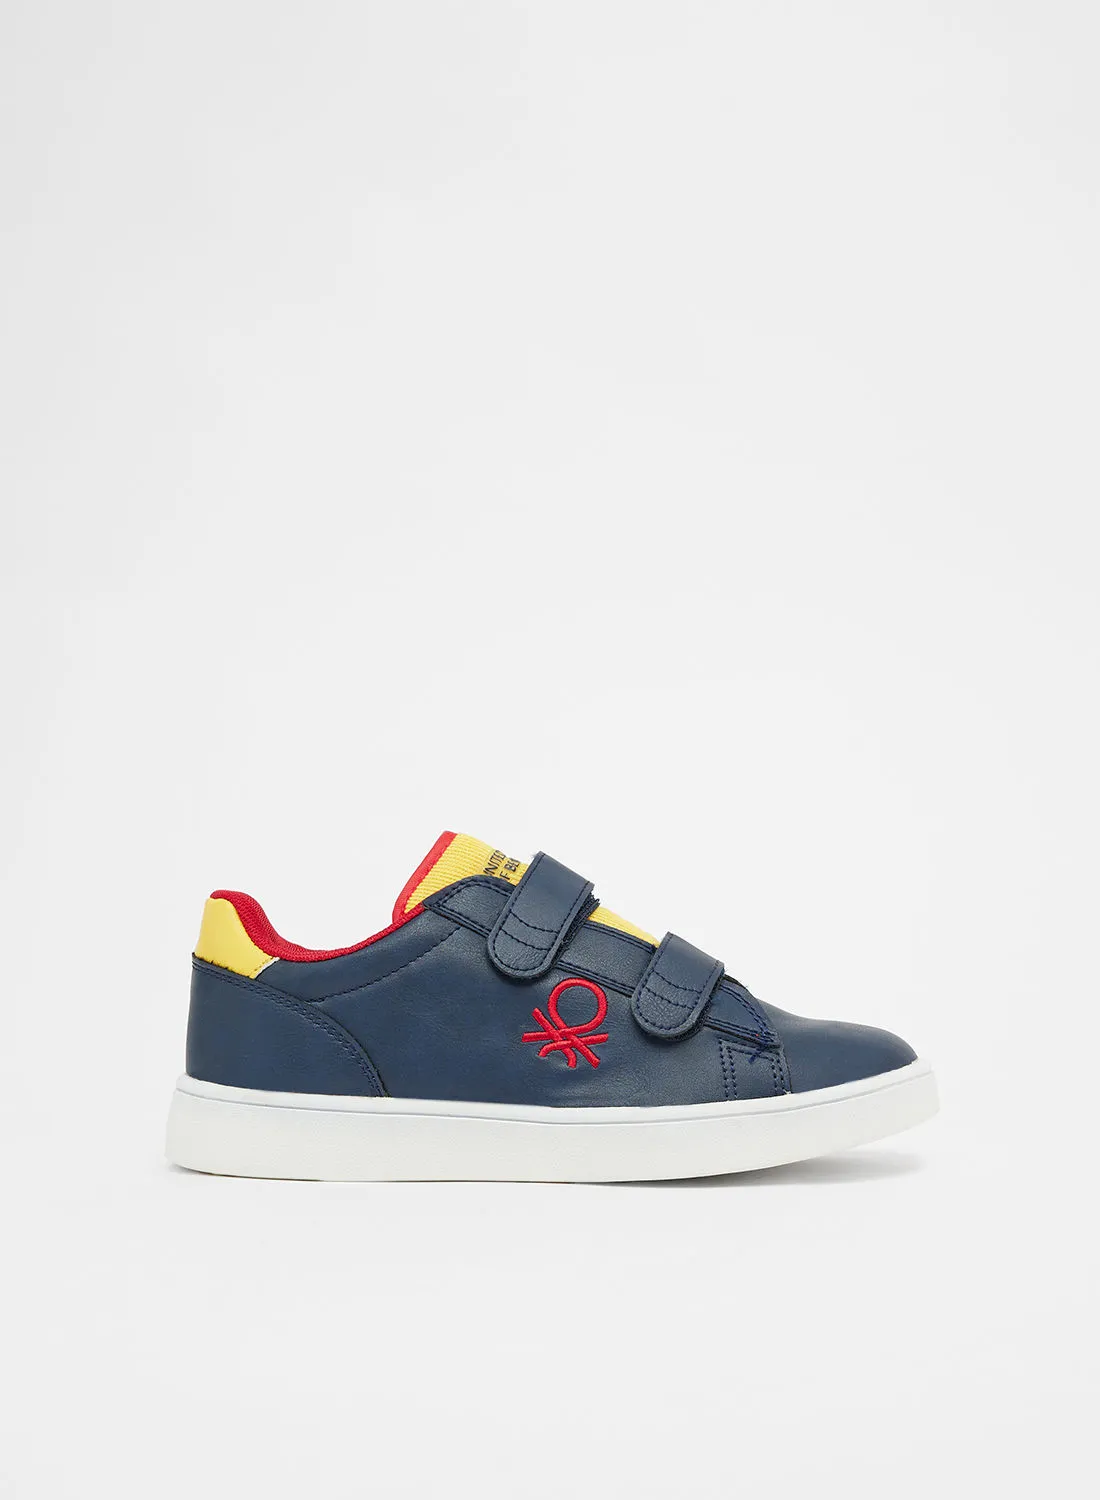 UNITED COLORS OF BENETTON Boys Label LTX Sneakers